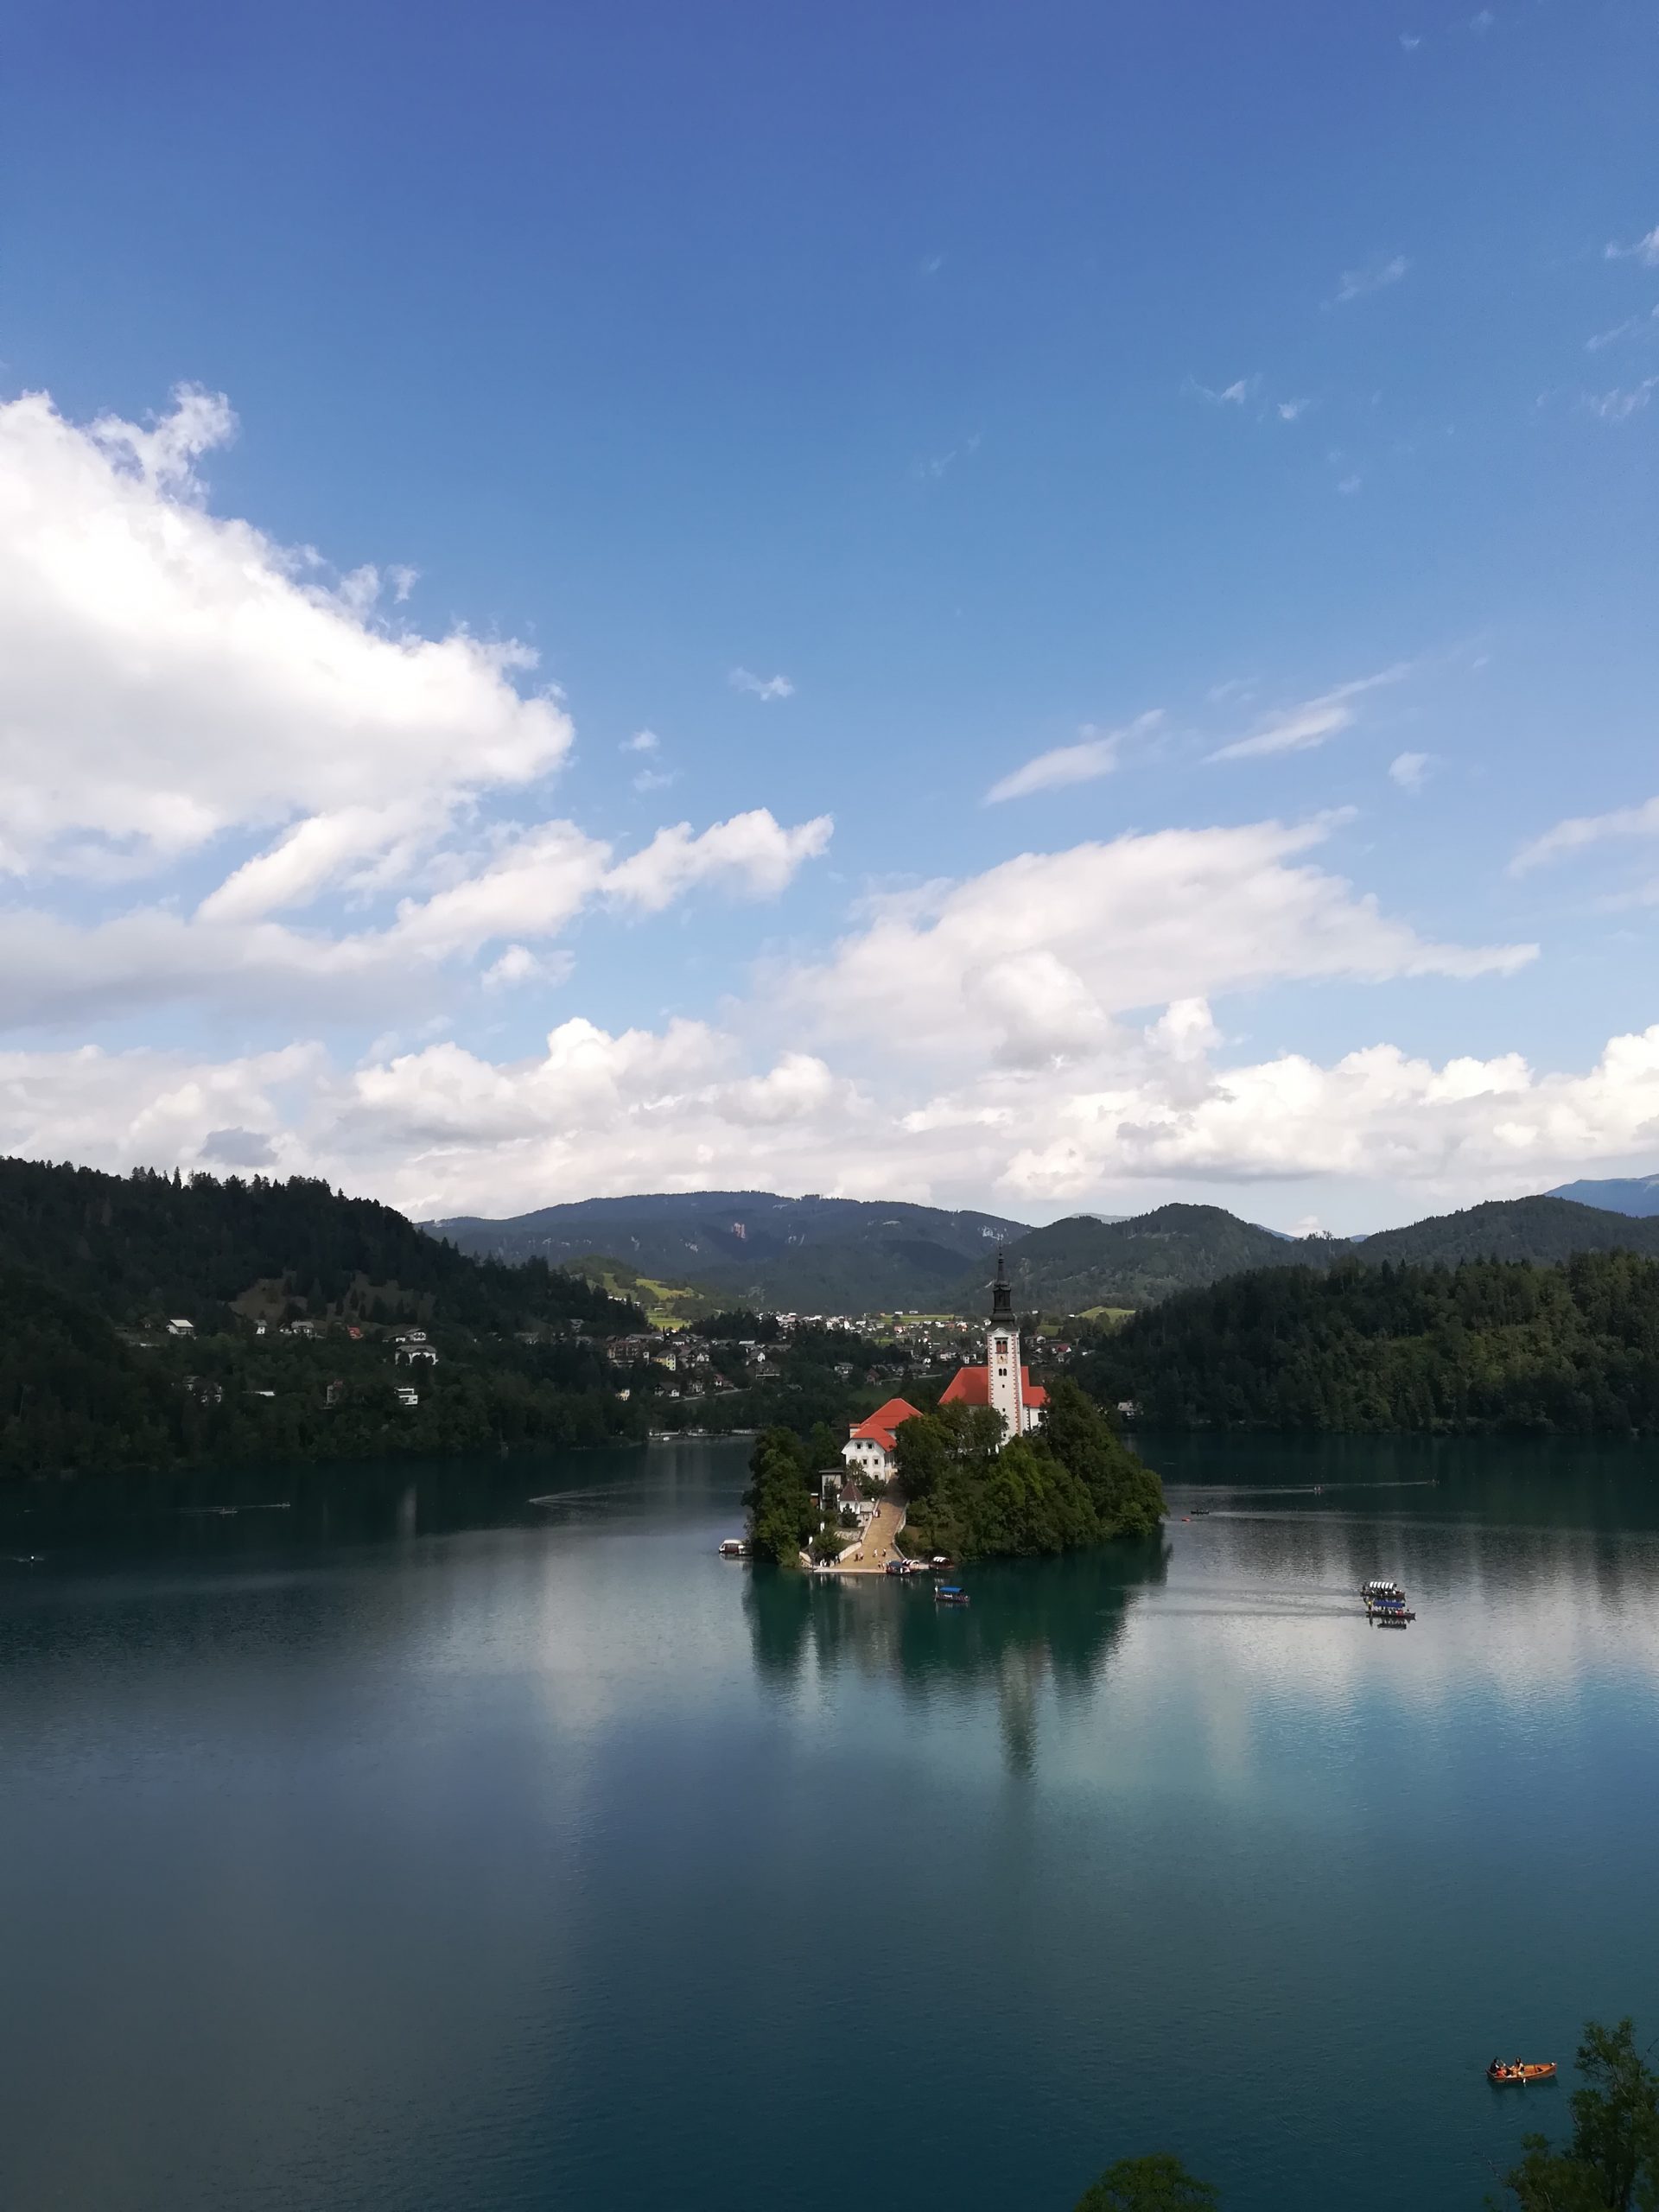 Bled lake, one of the most popular treasures of Slovenia